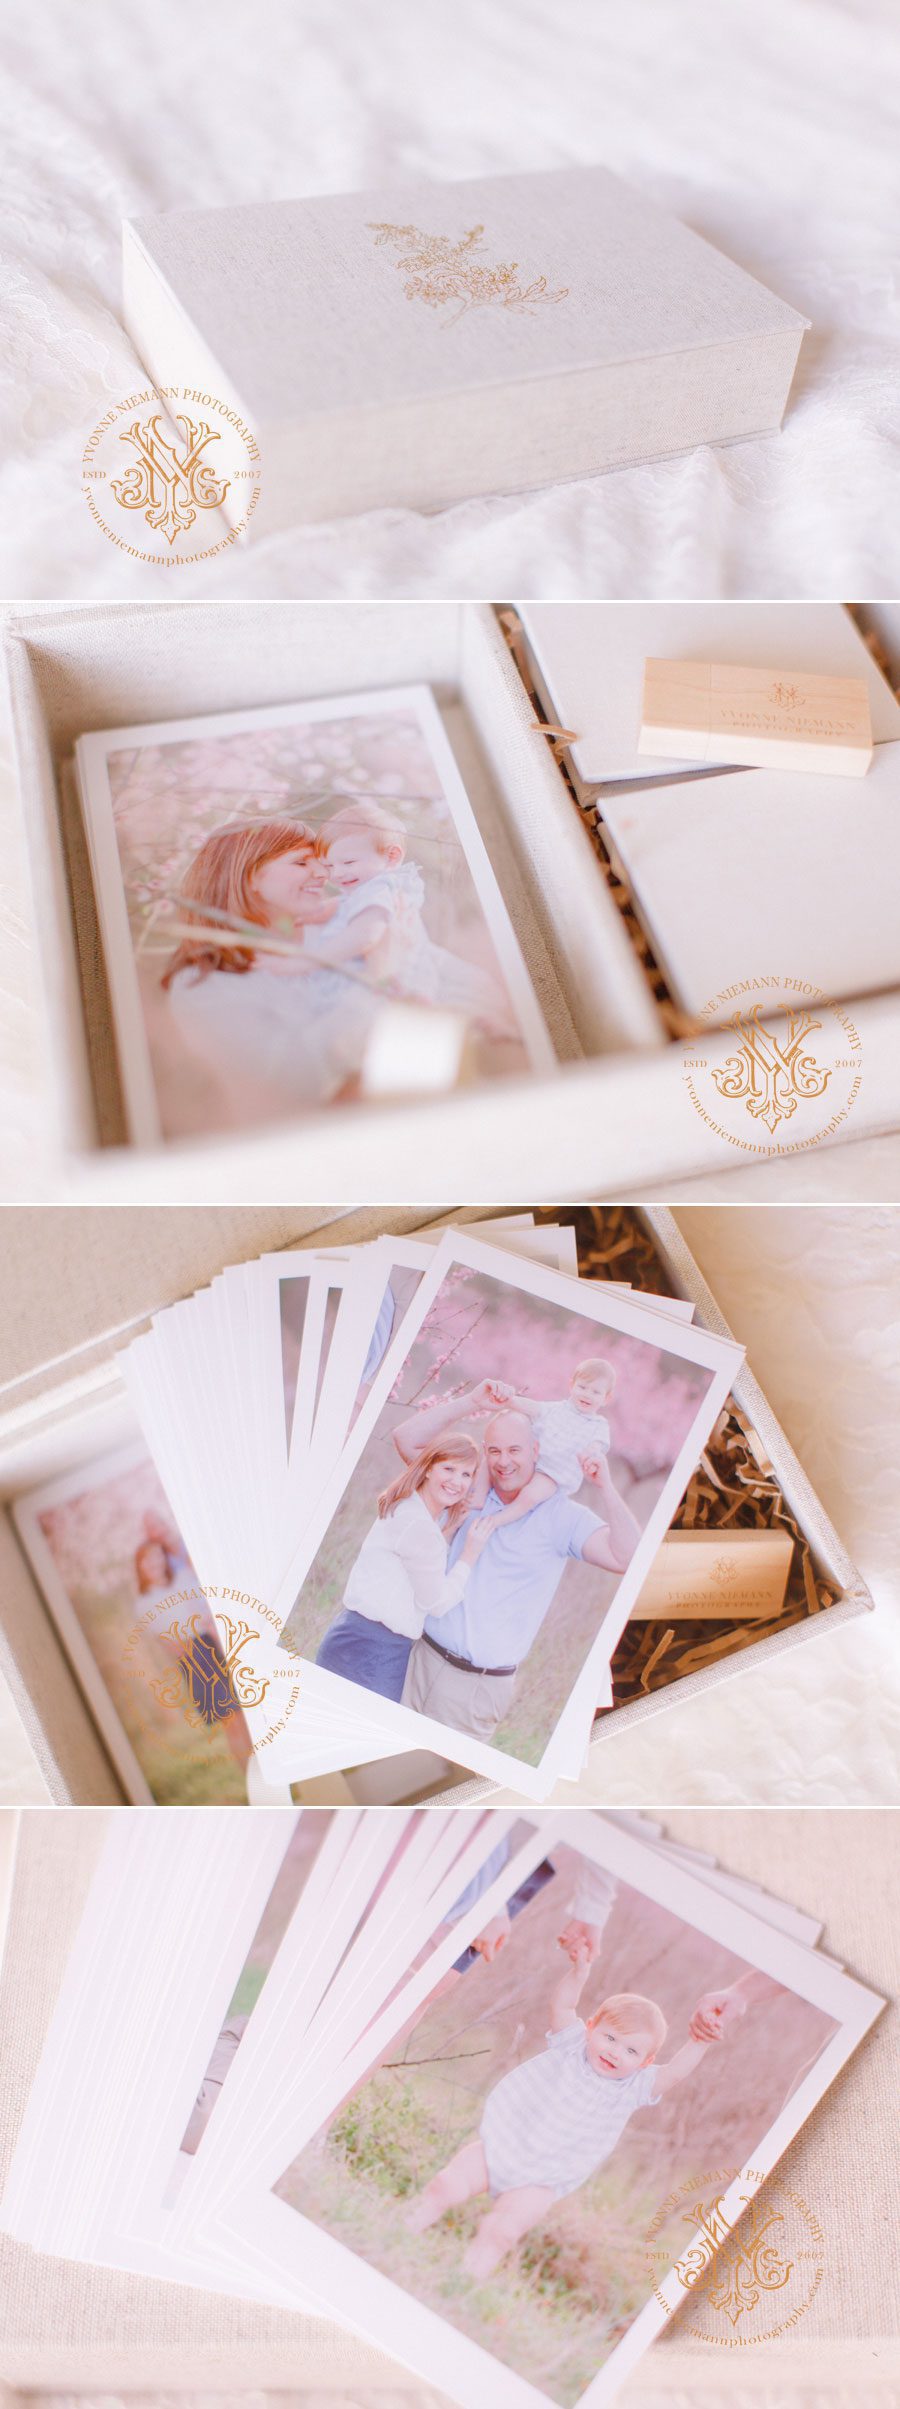 loose prints of a family photo session in Athens, GA in an heirloom box